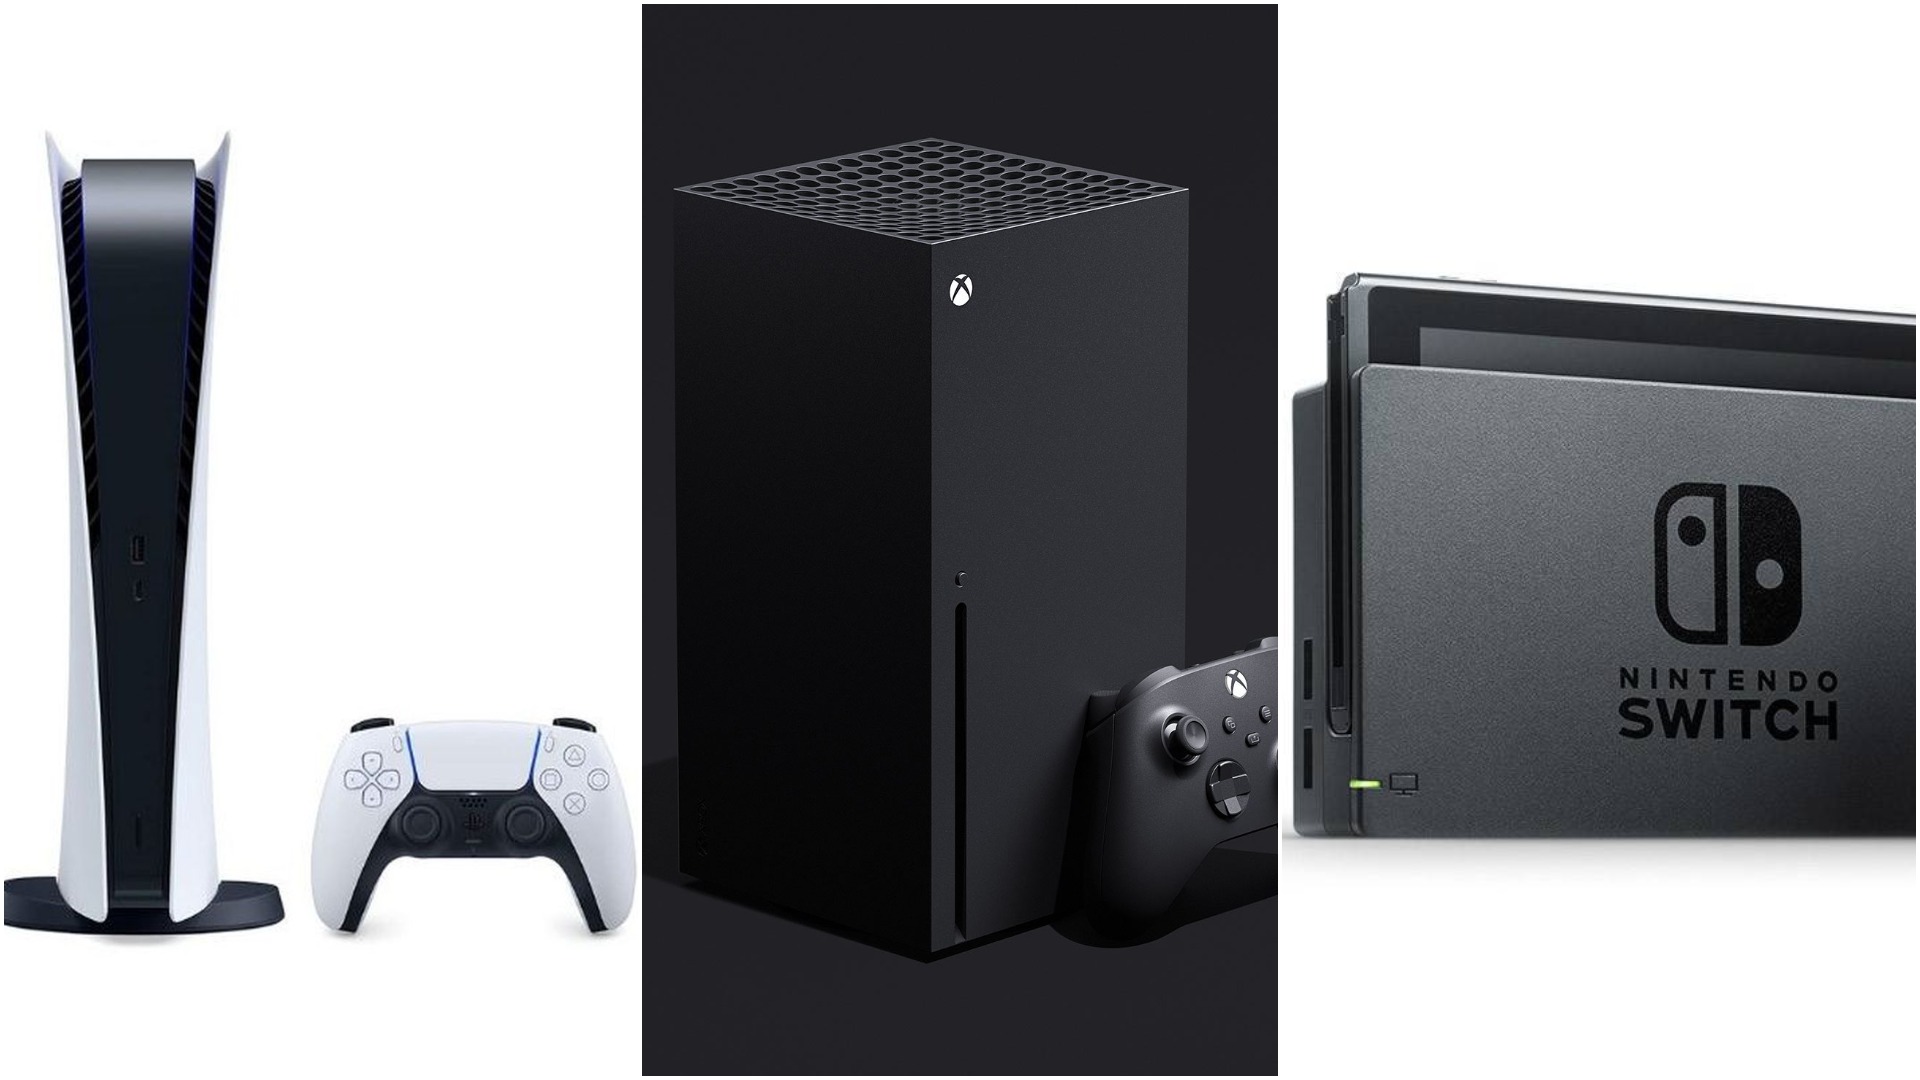 This Black Friday Has the Best PS5, Xbox Series Deals We've Ever Seen -  Next-Gen Console Watch 